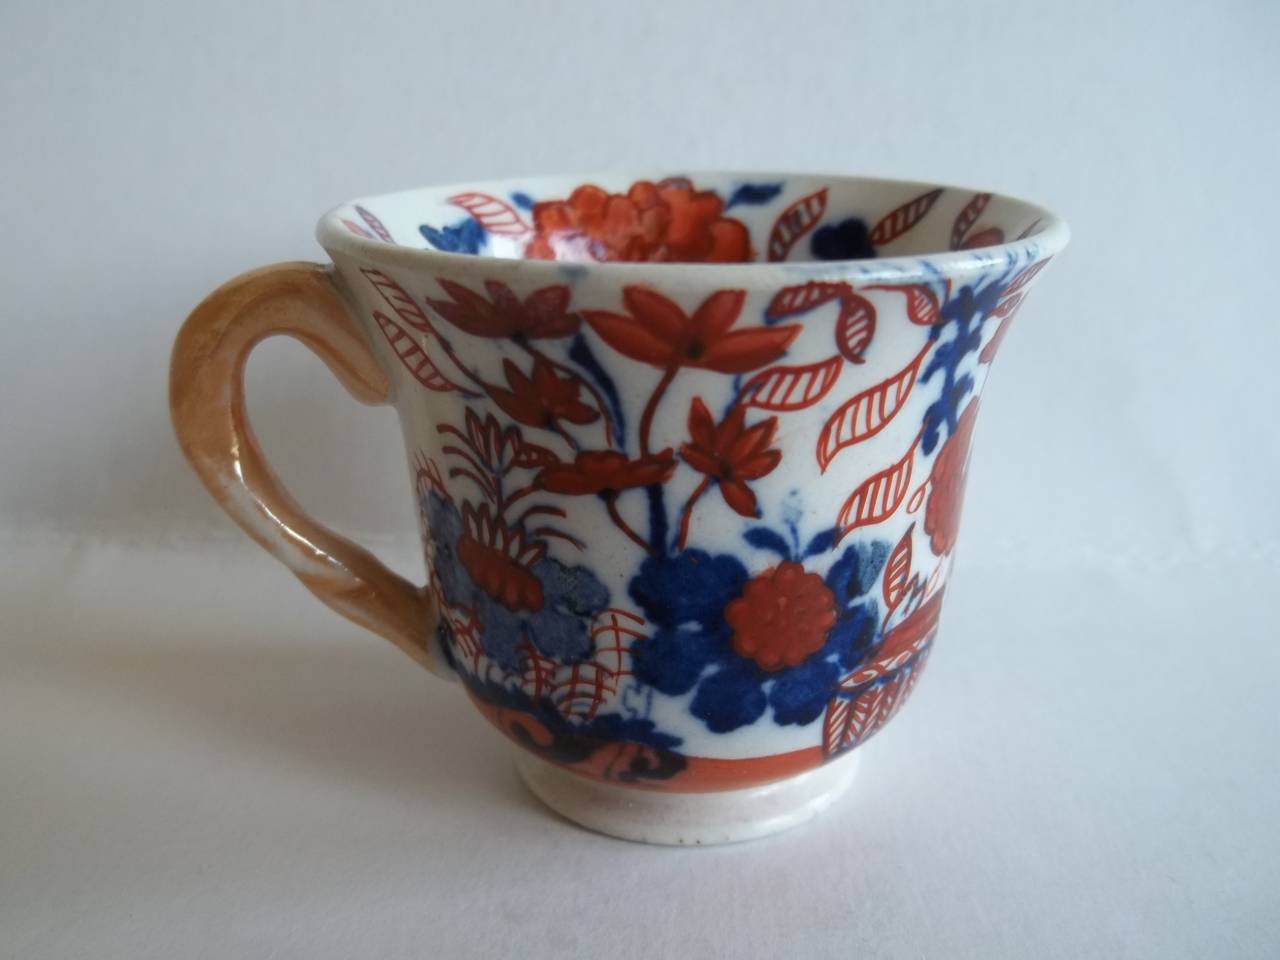 This is a miniature Mason's ironstone cup in the Japan basket pattern which we date to circa 1825.

Miniature or toy items of Masons ironstone are rare and hard to find today.

This is a very attractive cup with a flared rim on a pedestal base